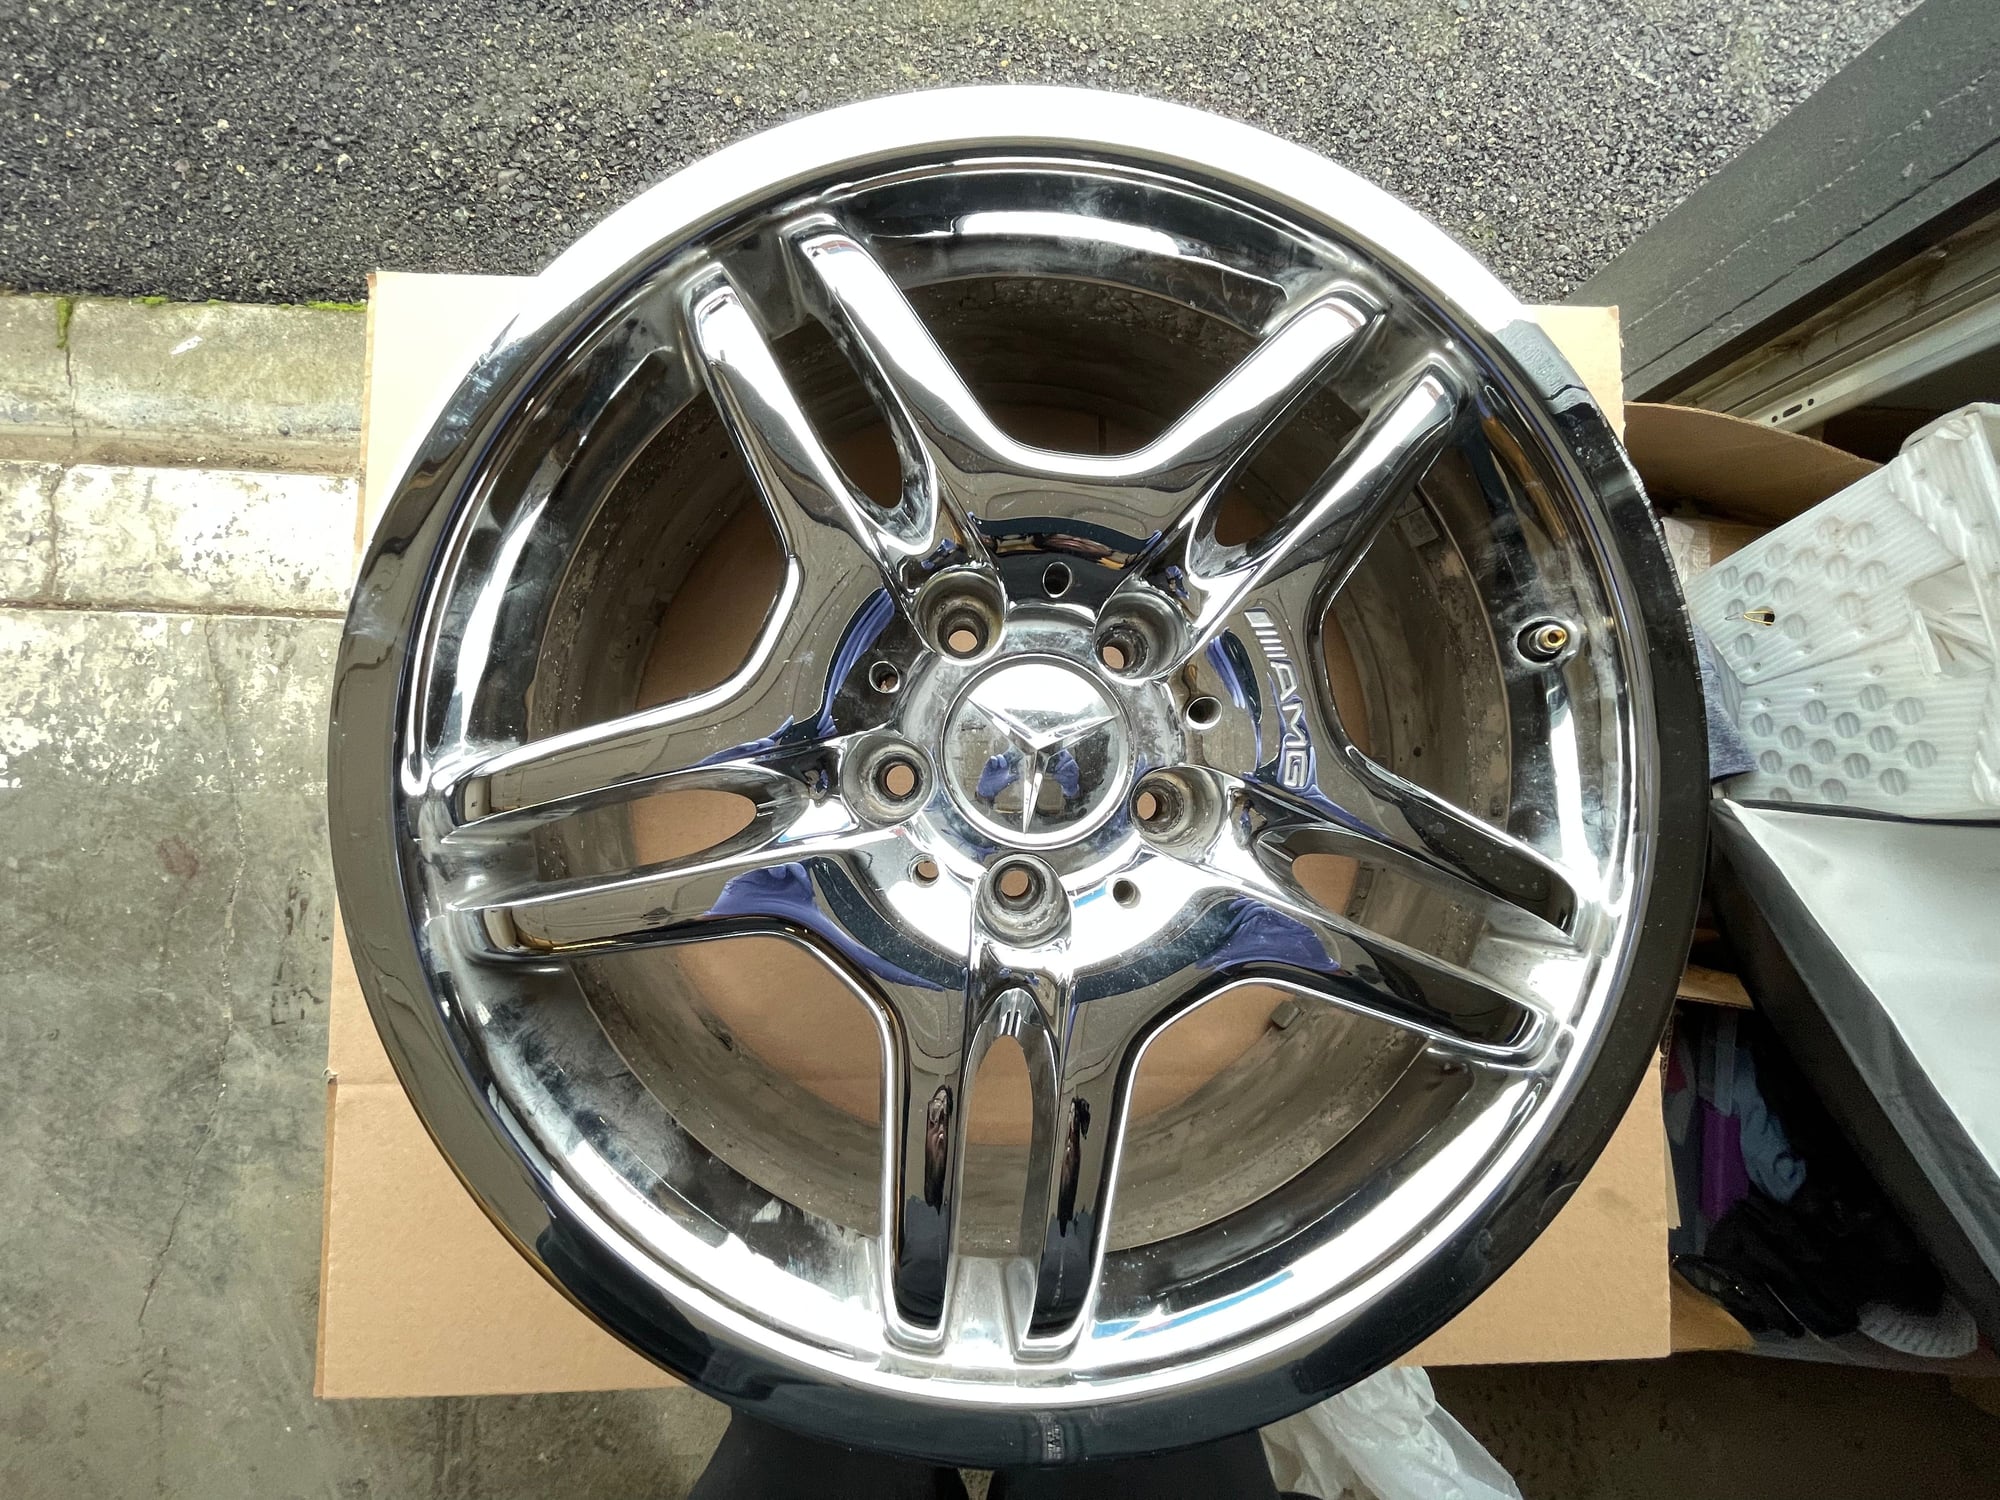 Wheels and Tires/Axles - Chrome OEM 18" C55 / CLK55 AMG Wheels - Used - 2003 to 2009 Mercedes-Benz CLK55 AMG - Portland, OR 97209, United States